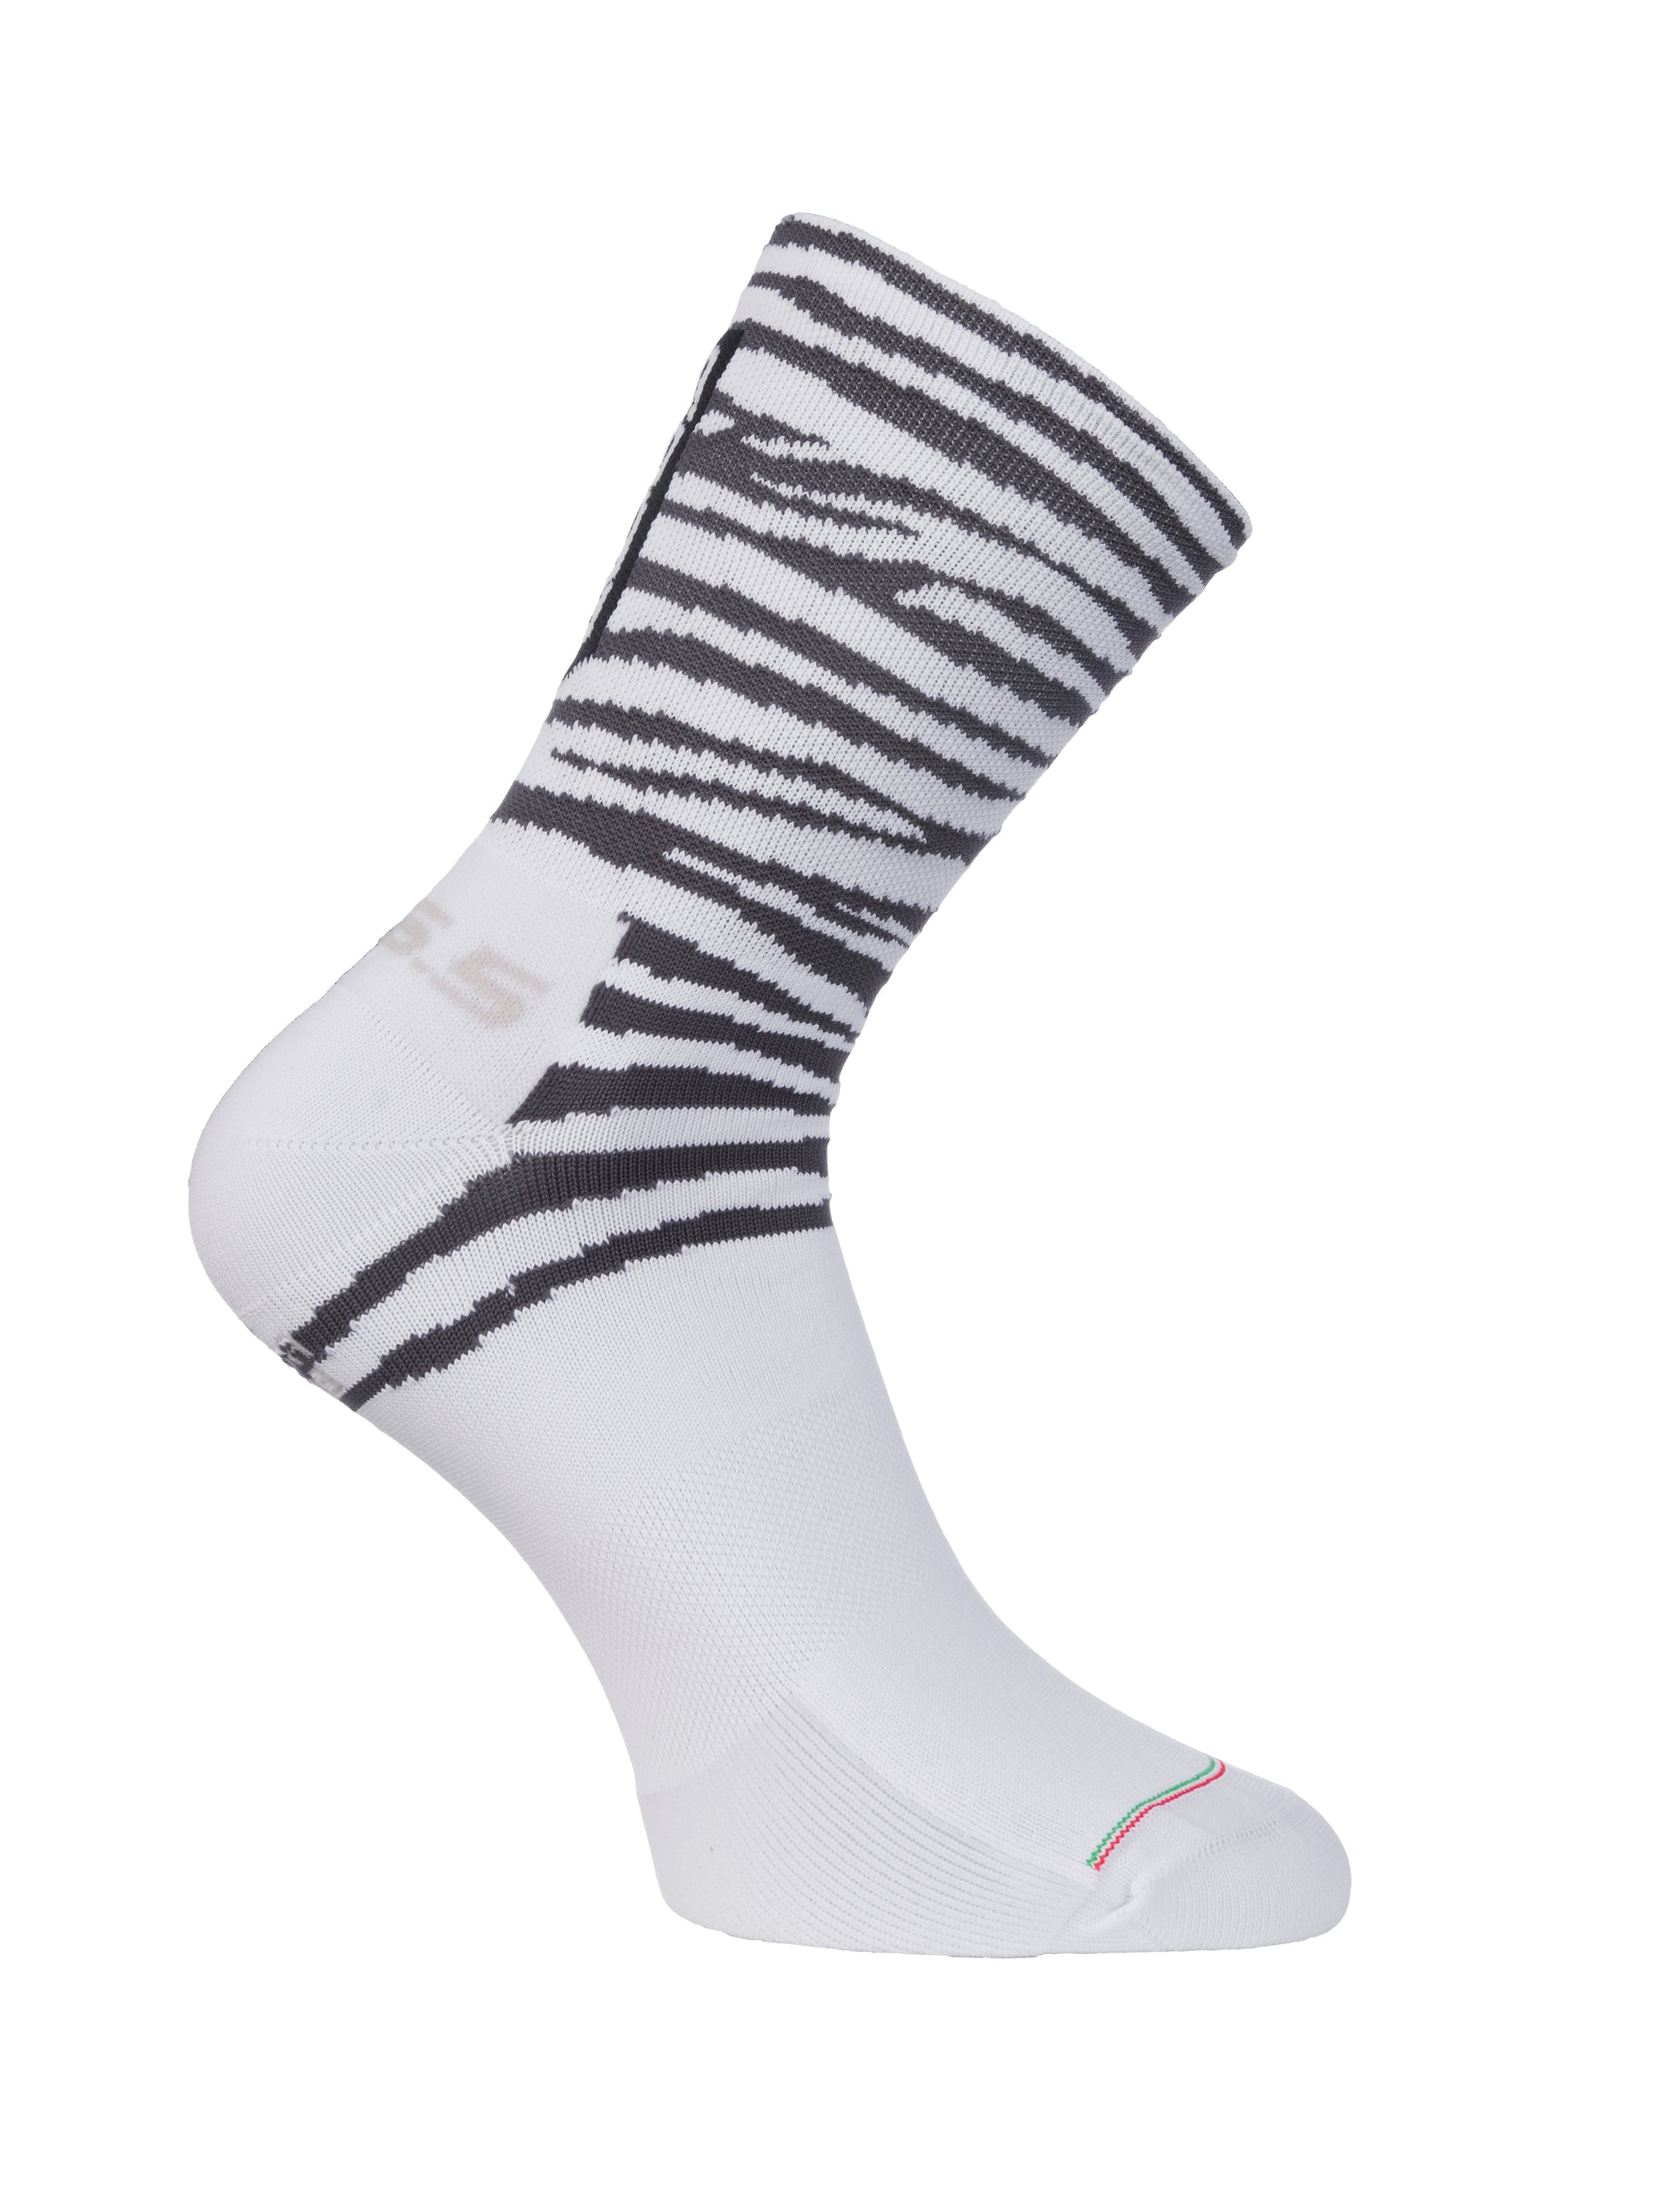 Q36.5 Ultra Tiger Cycling Socks in White  (New)